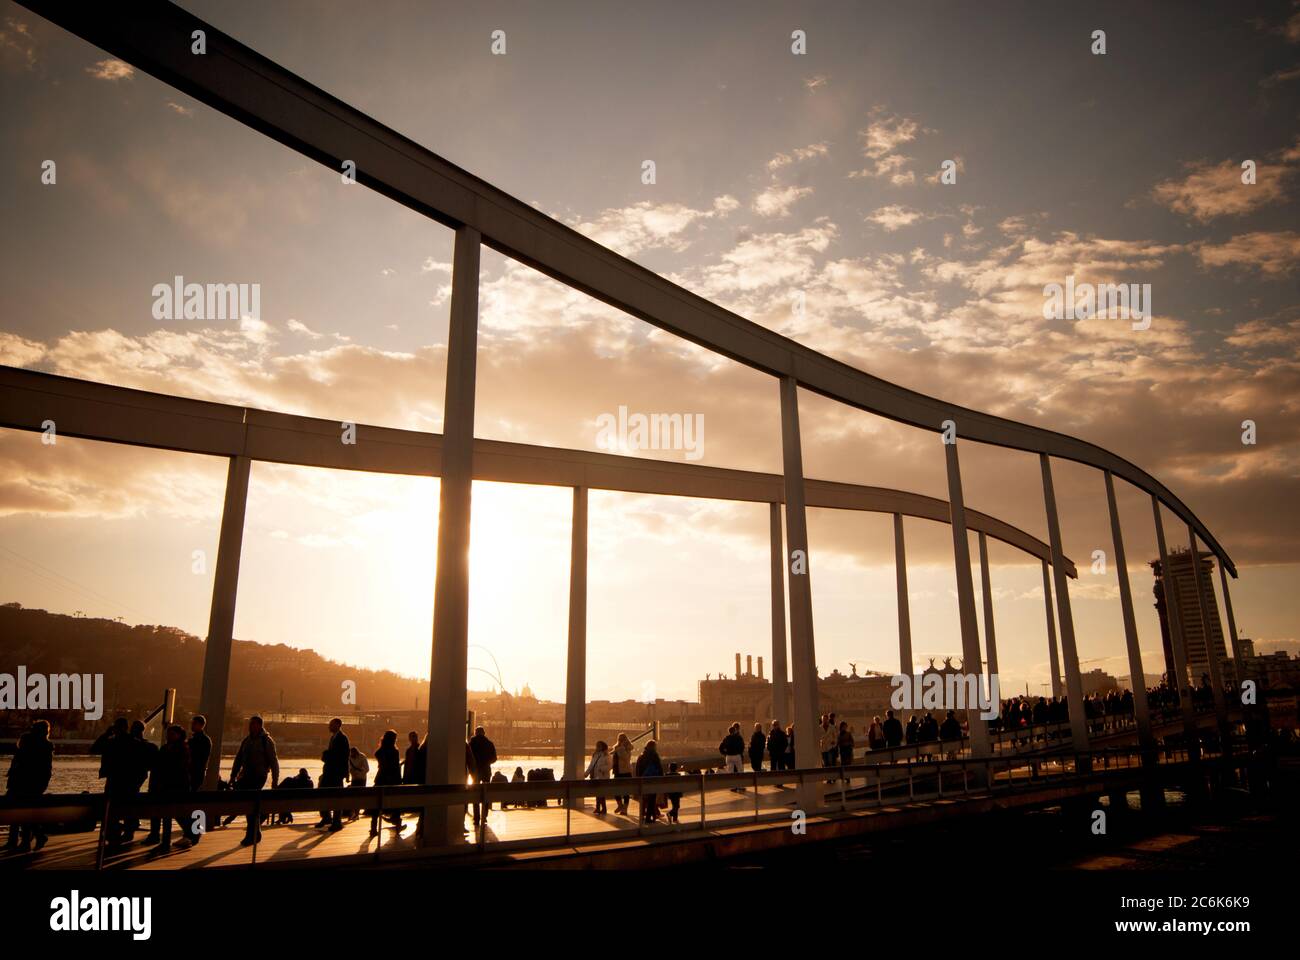 Walkway to the Maremagnum shopping center at sunset, Barcelona, Spain Stock Photo